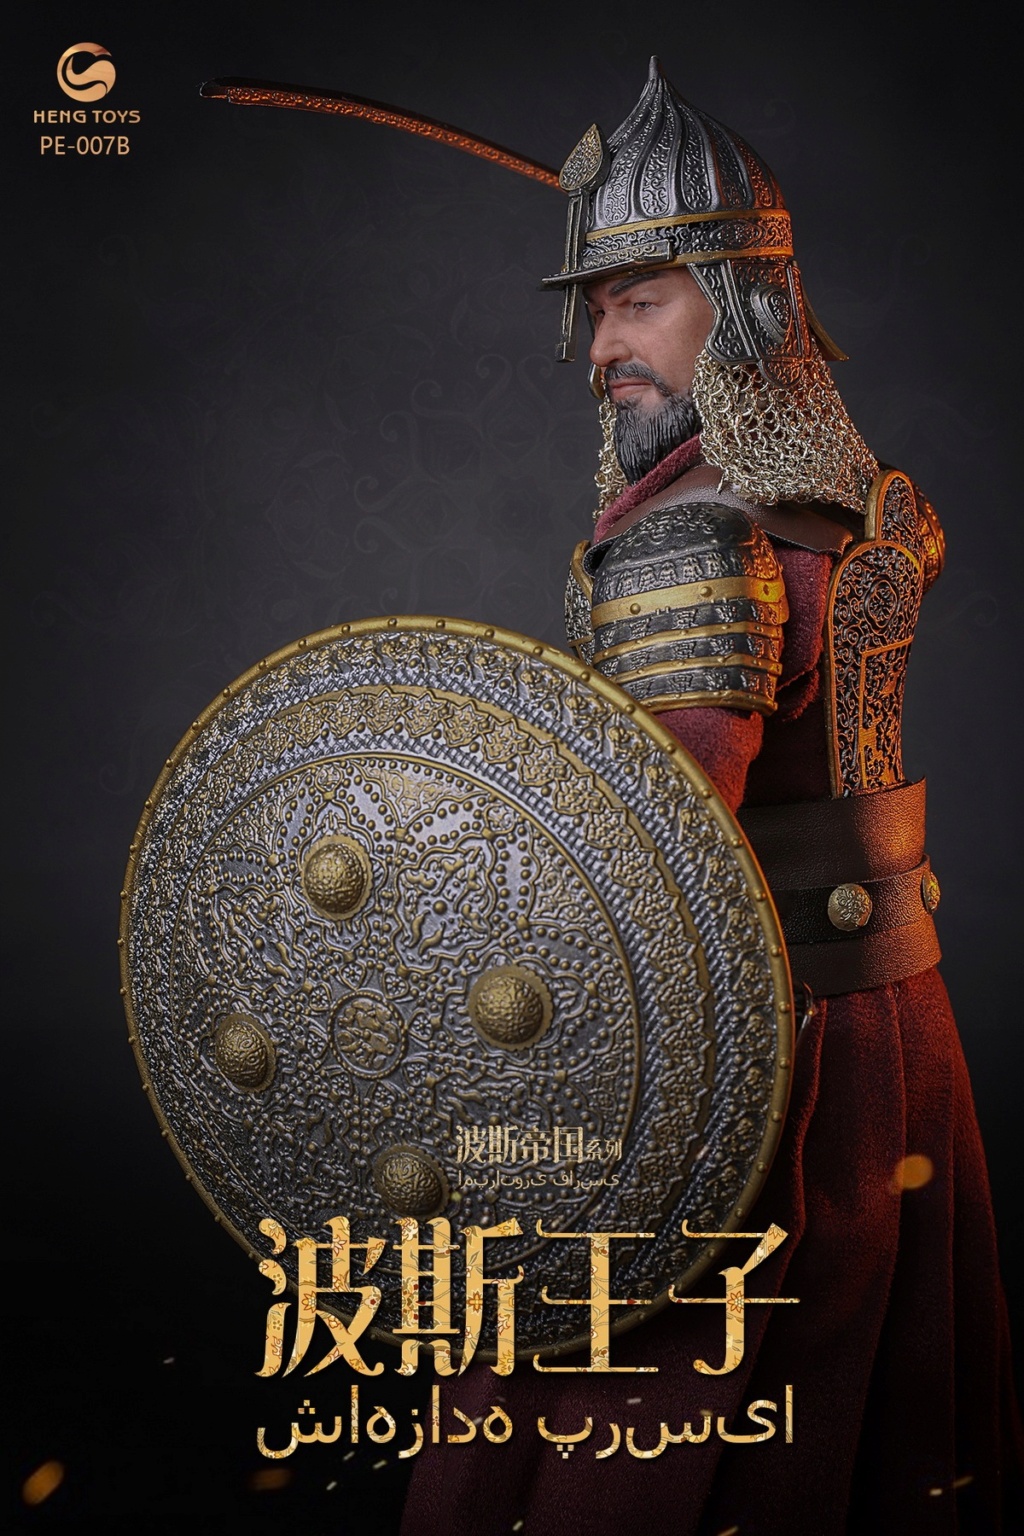 PrinceofPersia - NEW PRODUCT: HengToys: 1/6 Persian Empire Series-Prince of Persia [A & B Section] (#PE-007) 16040810